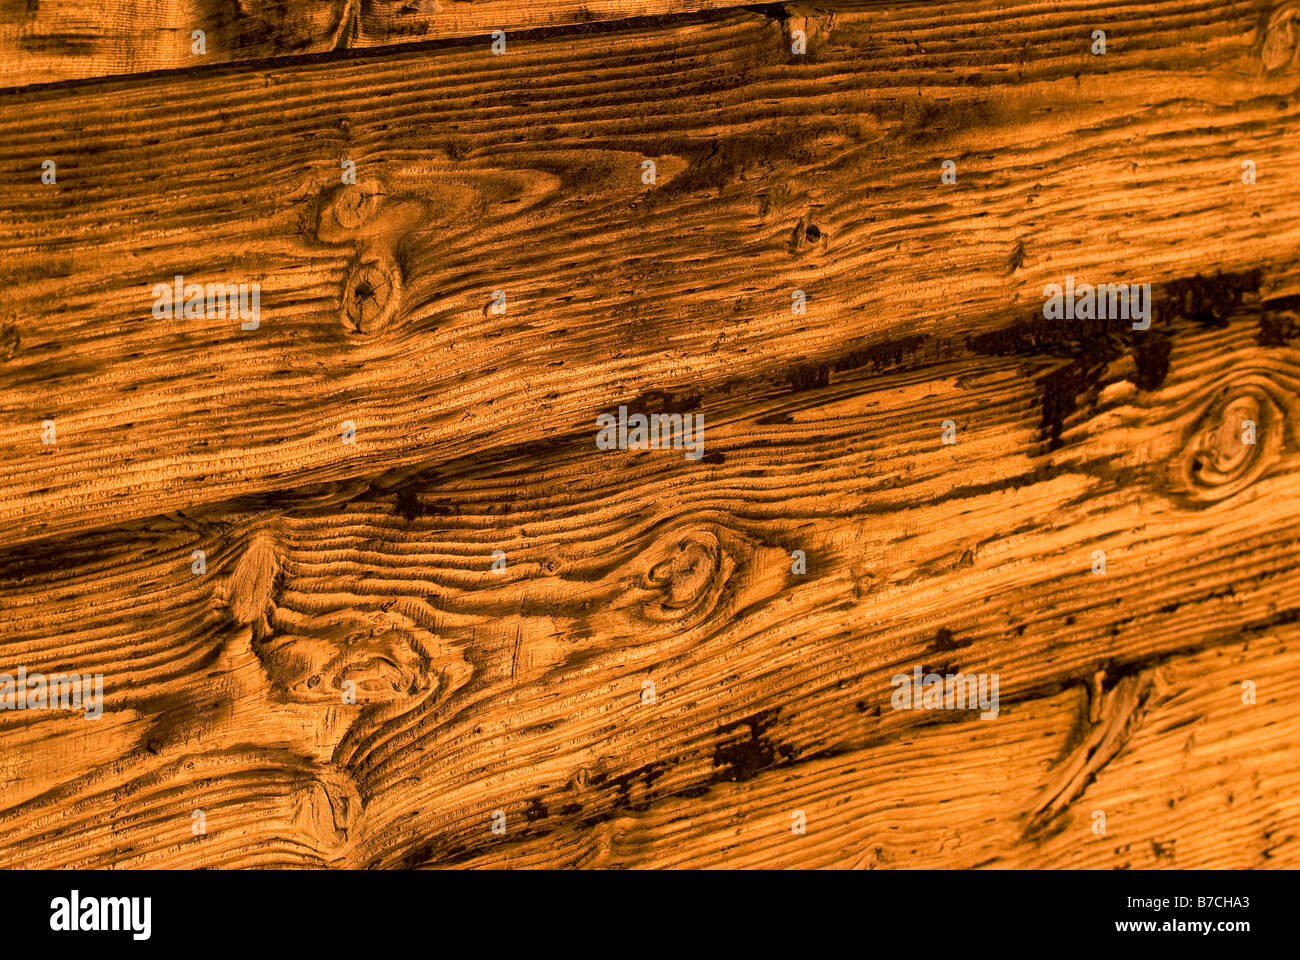 Close-up of a wooden retaining wall holding up a bank. Stock Photo